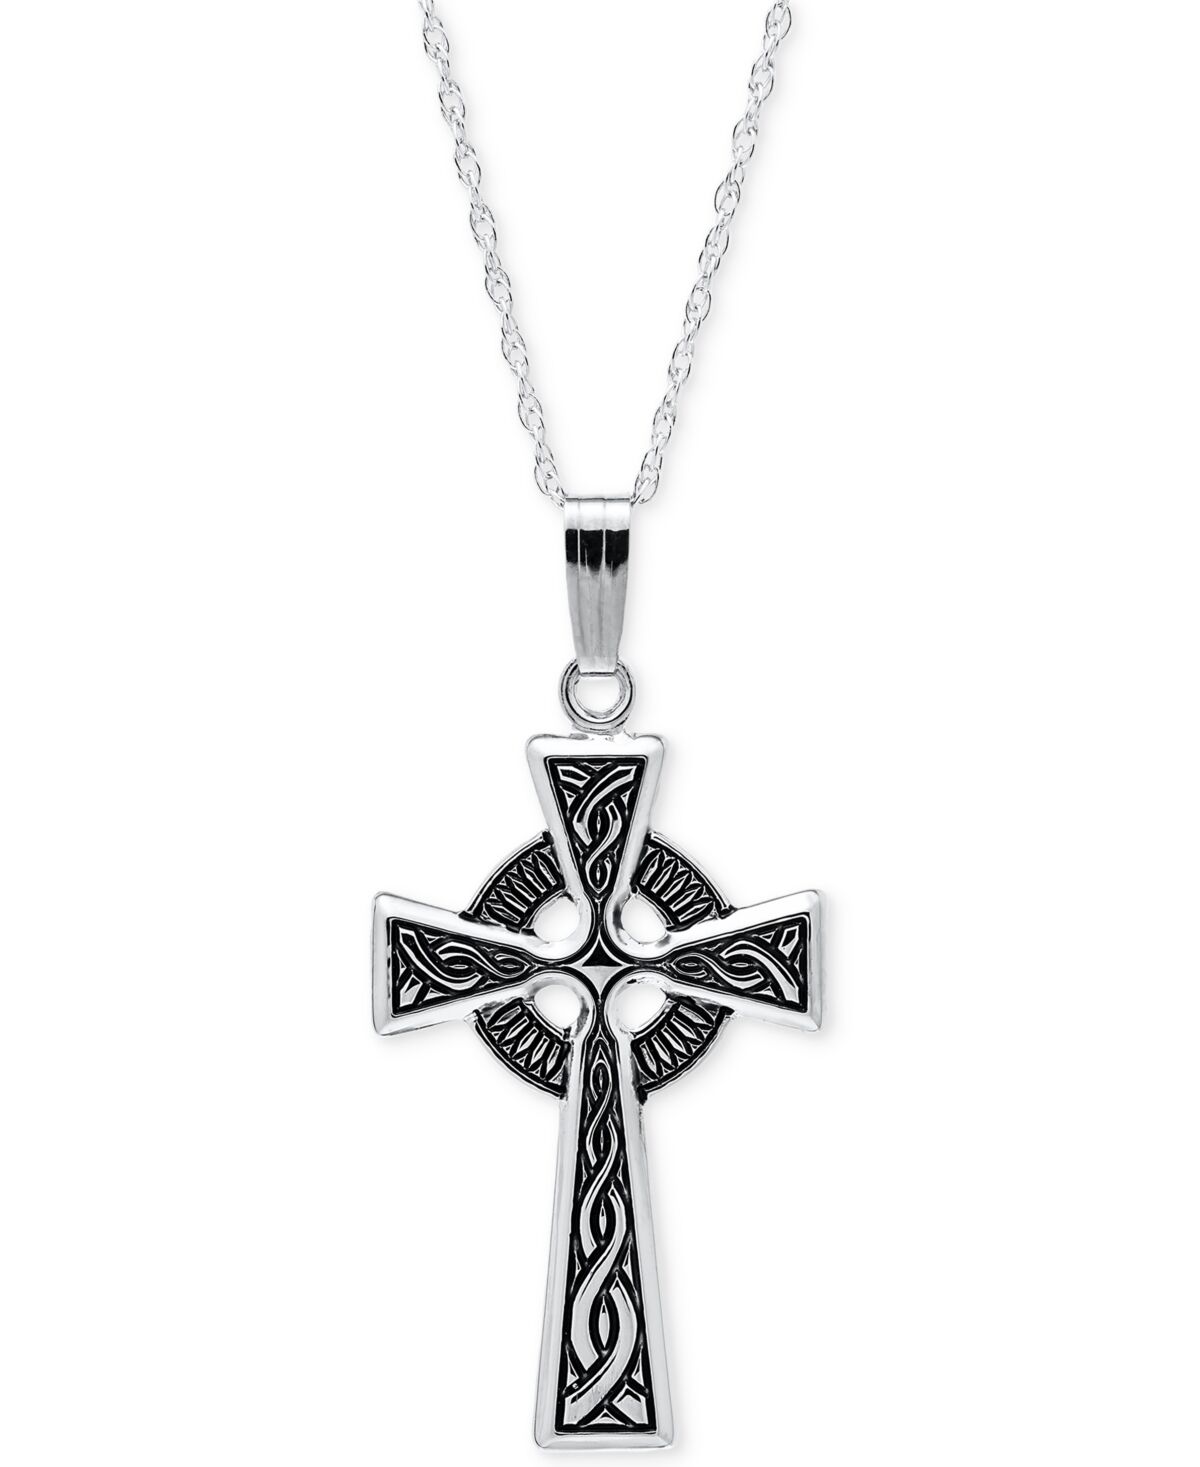 Macy's Embossed Celtic Cross Pendant Necklace with Antique Finish in Sterling Silver - Silver